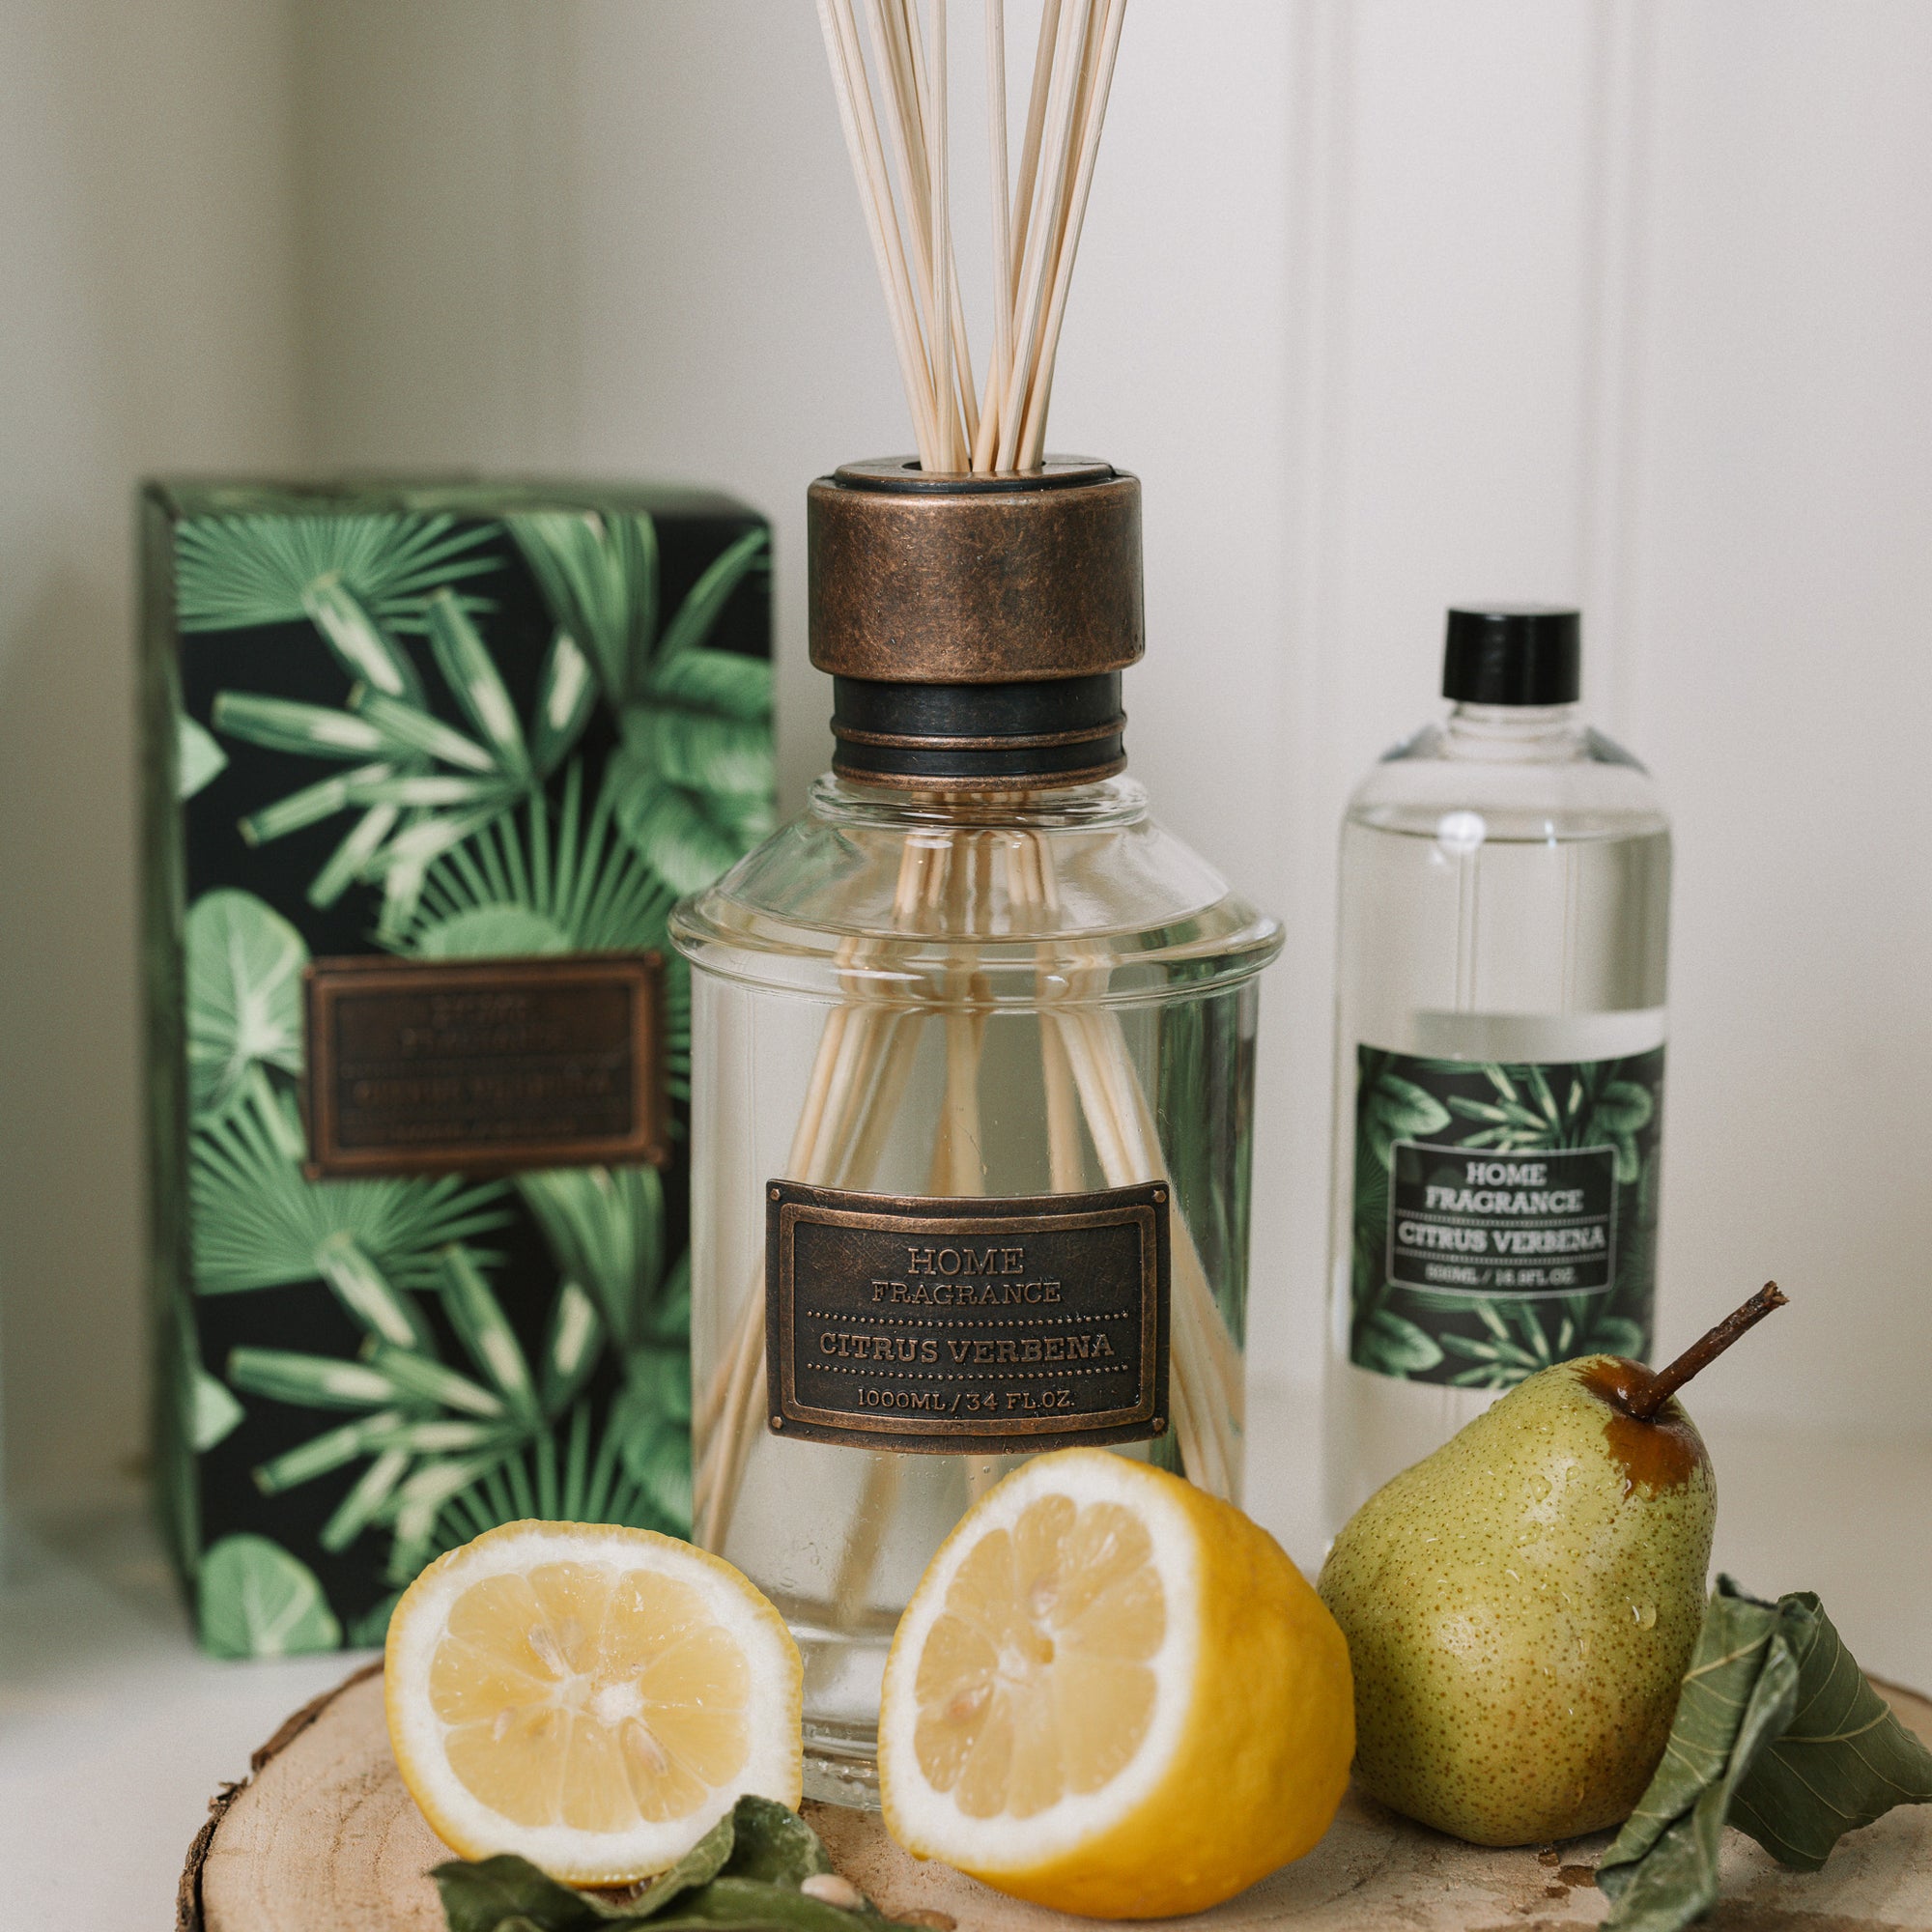 Home fragrance citrus verbena reed diffuser with lemons and greenery.